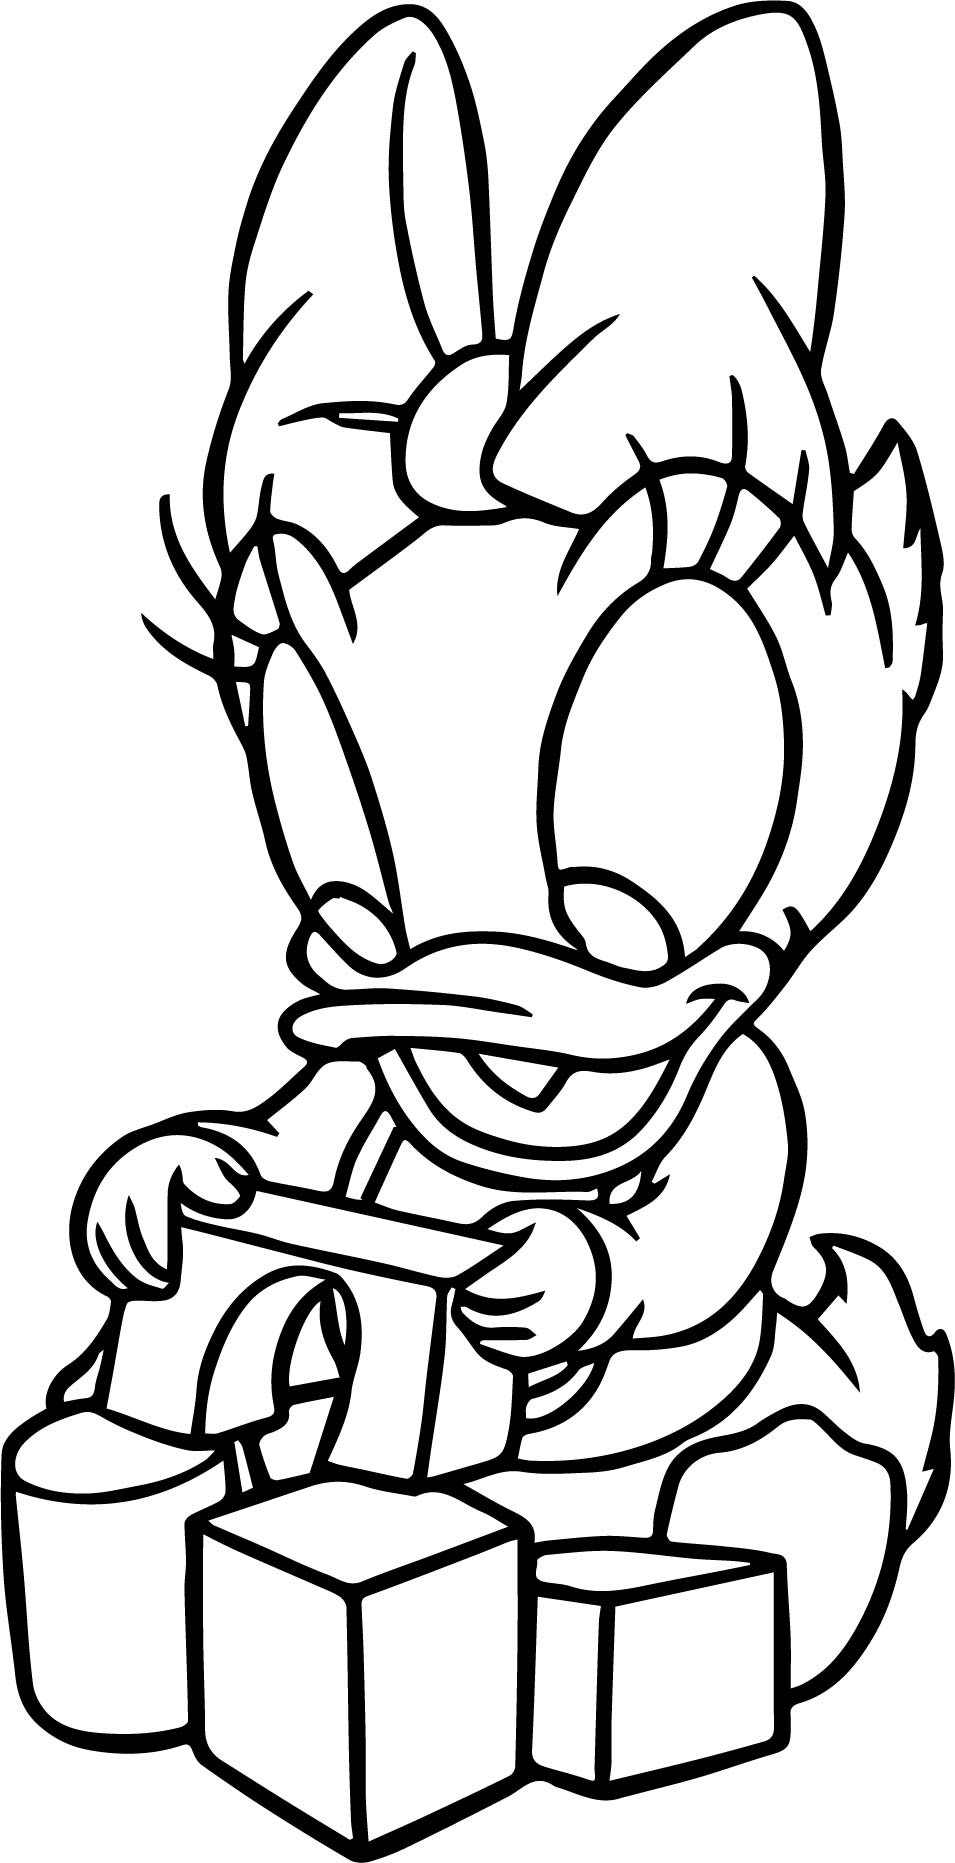 Baby Daisy Duck Playing With Blocks Coloring Page Wecoloringpage.com